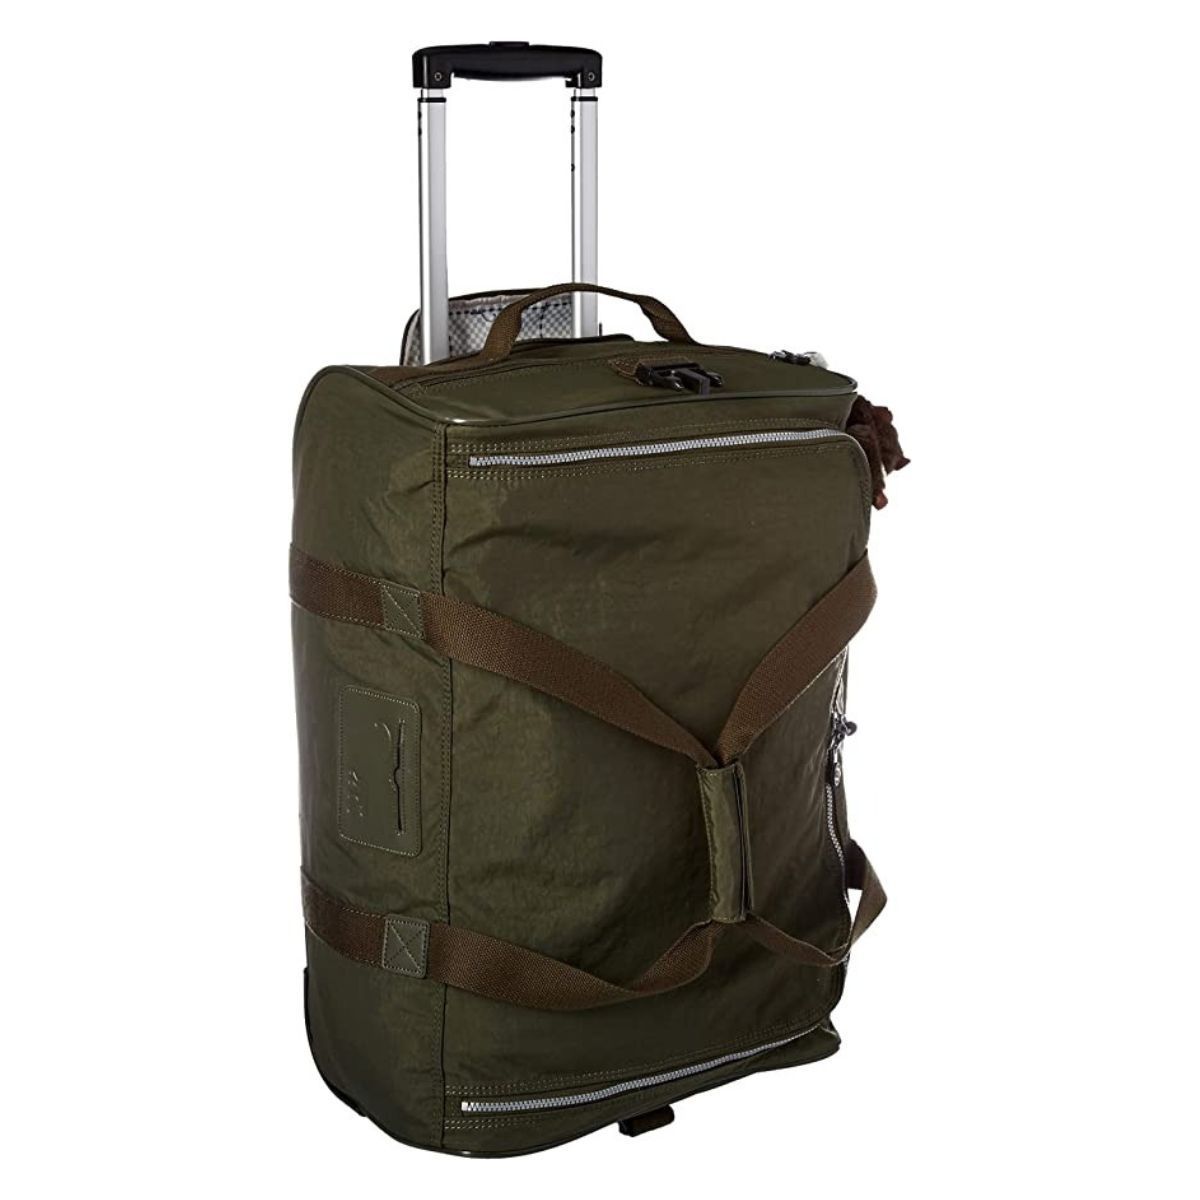 Discover Small Wheeled Duffle Bag